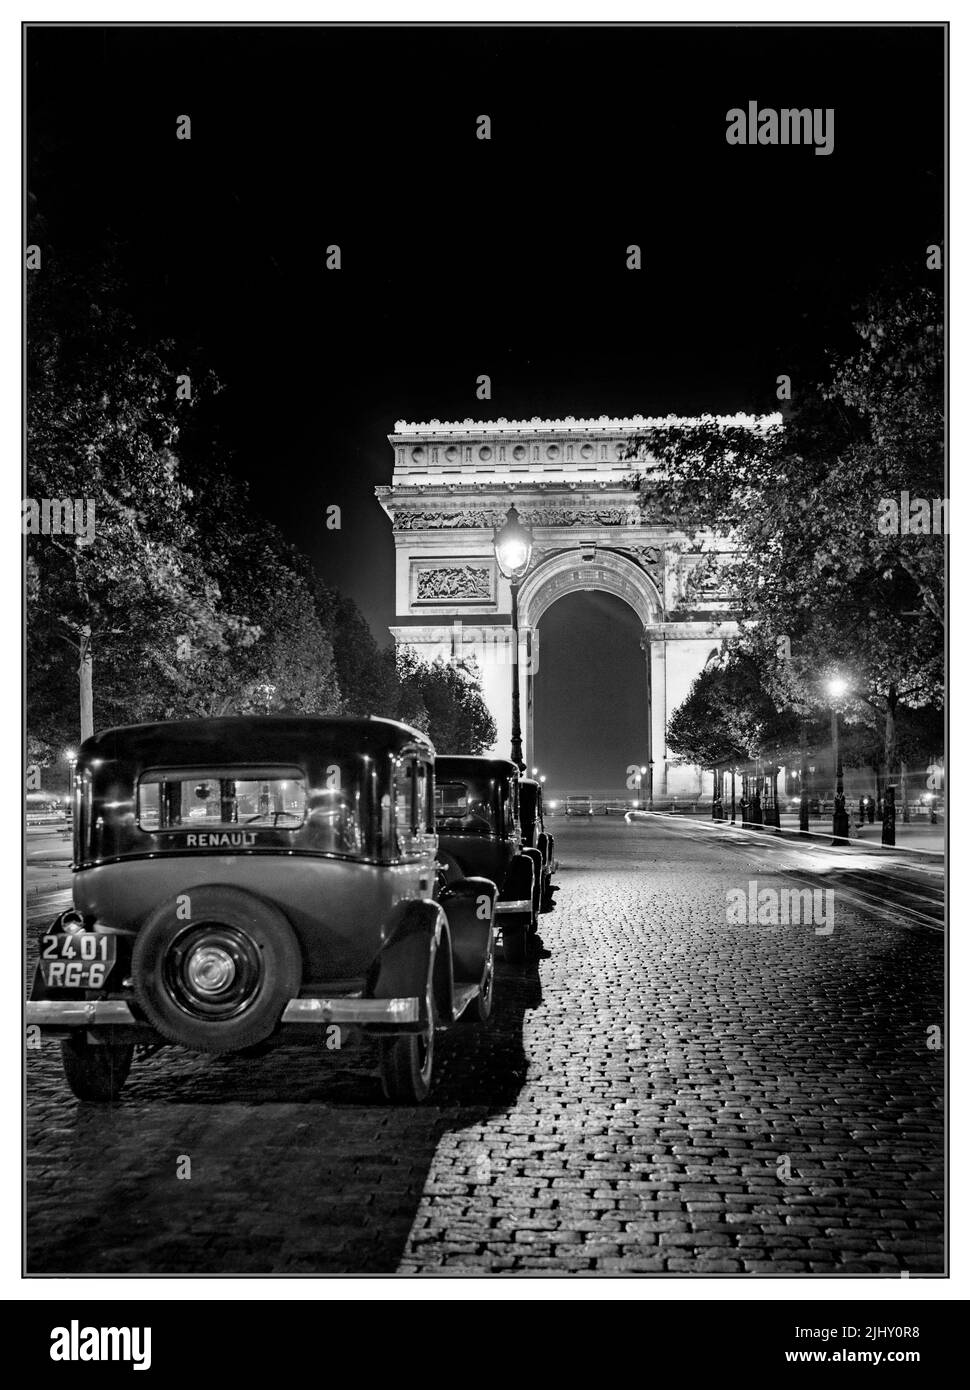 Vintage 1930s Paris and The Arc de Triomphe at night with a line of French Renault Taxis in line on the cobbled Champs Elysees Paris France Stock Photo